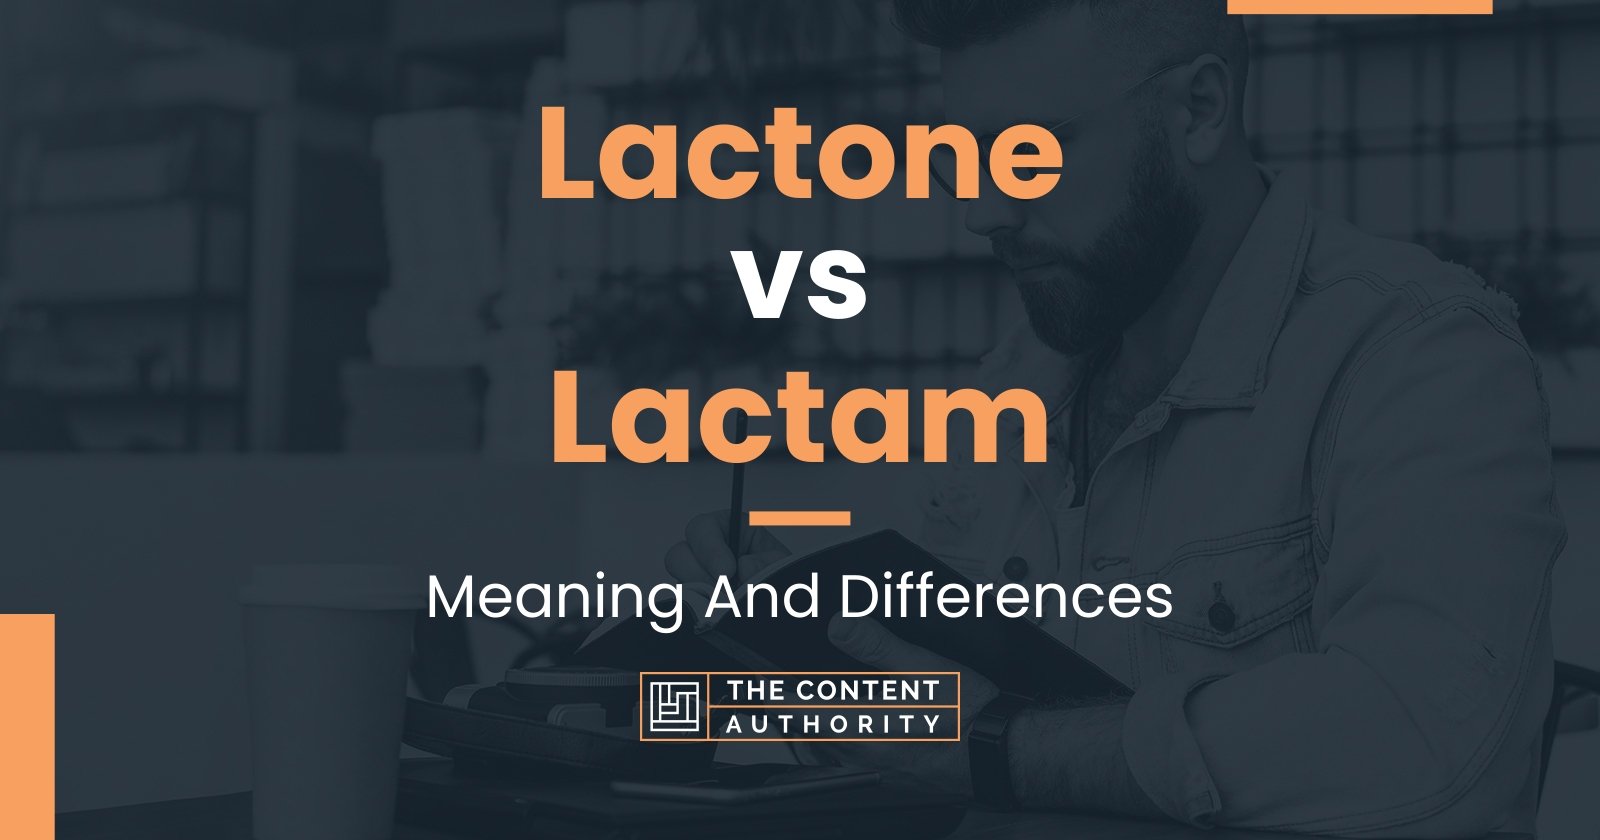 Lactone vs Lactam: Meaning And Differences